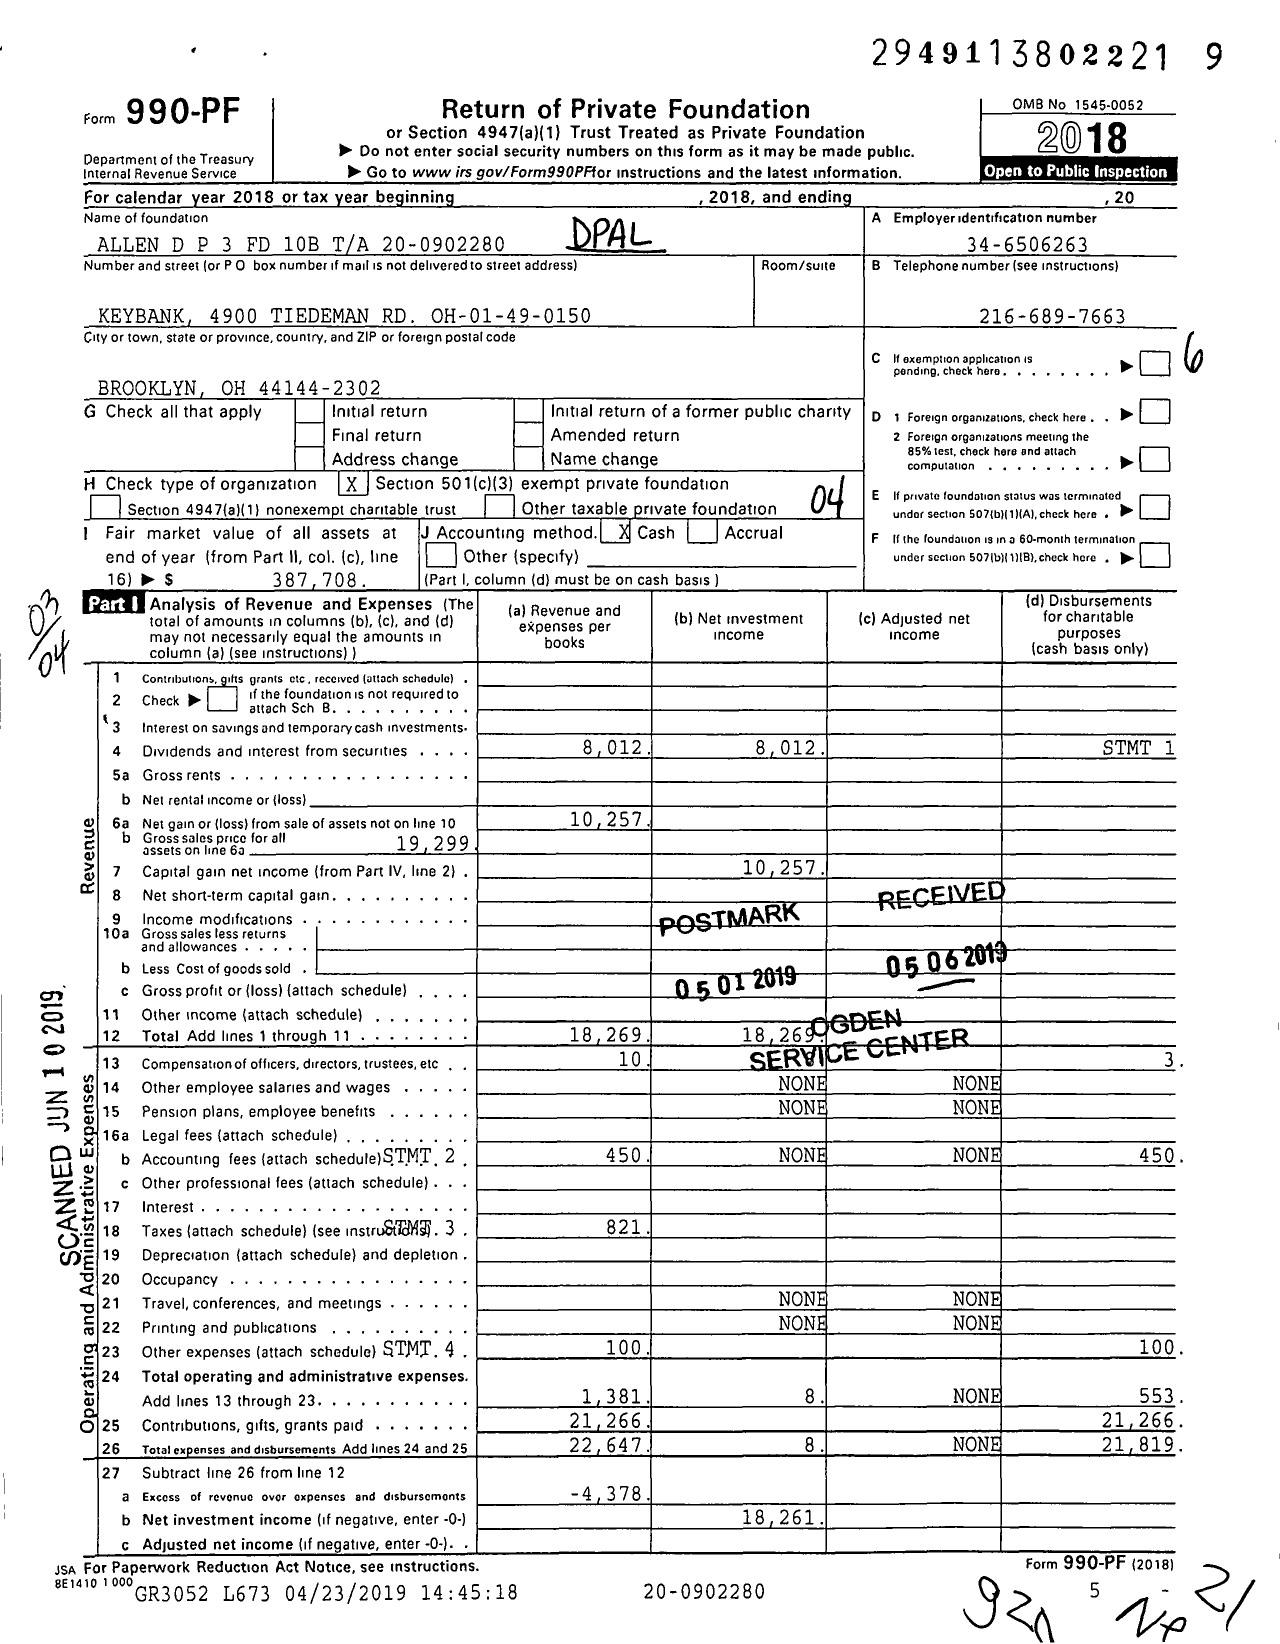 Image of first page of 2018 Form 990PF for D P Allen TR 3 Fund 10-B